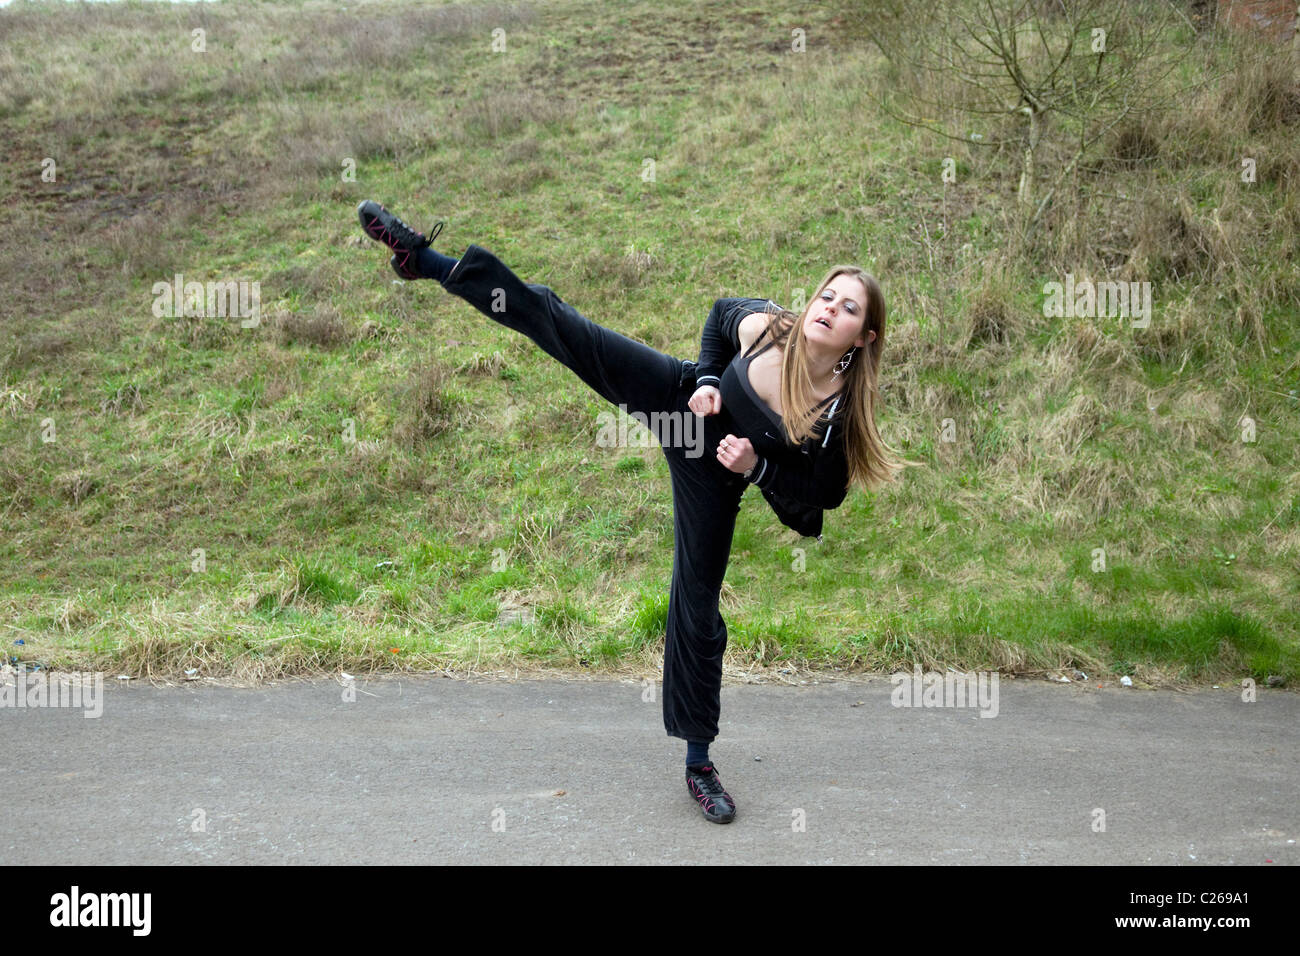 Young Caucasian woman doing a tae kwon do kick outside, taken in Emersons Green, Bristol Stock Photo